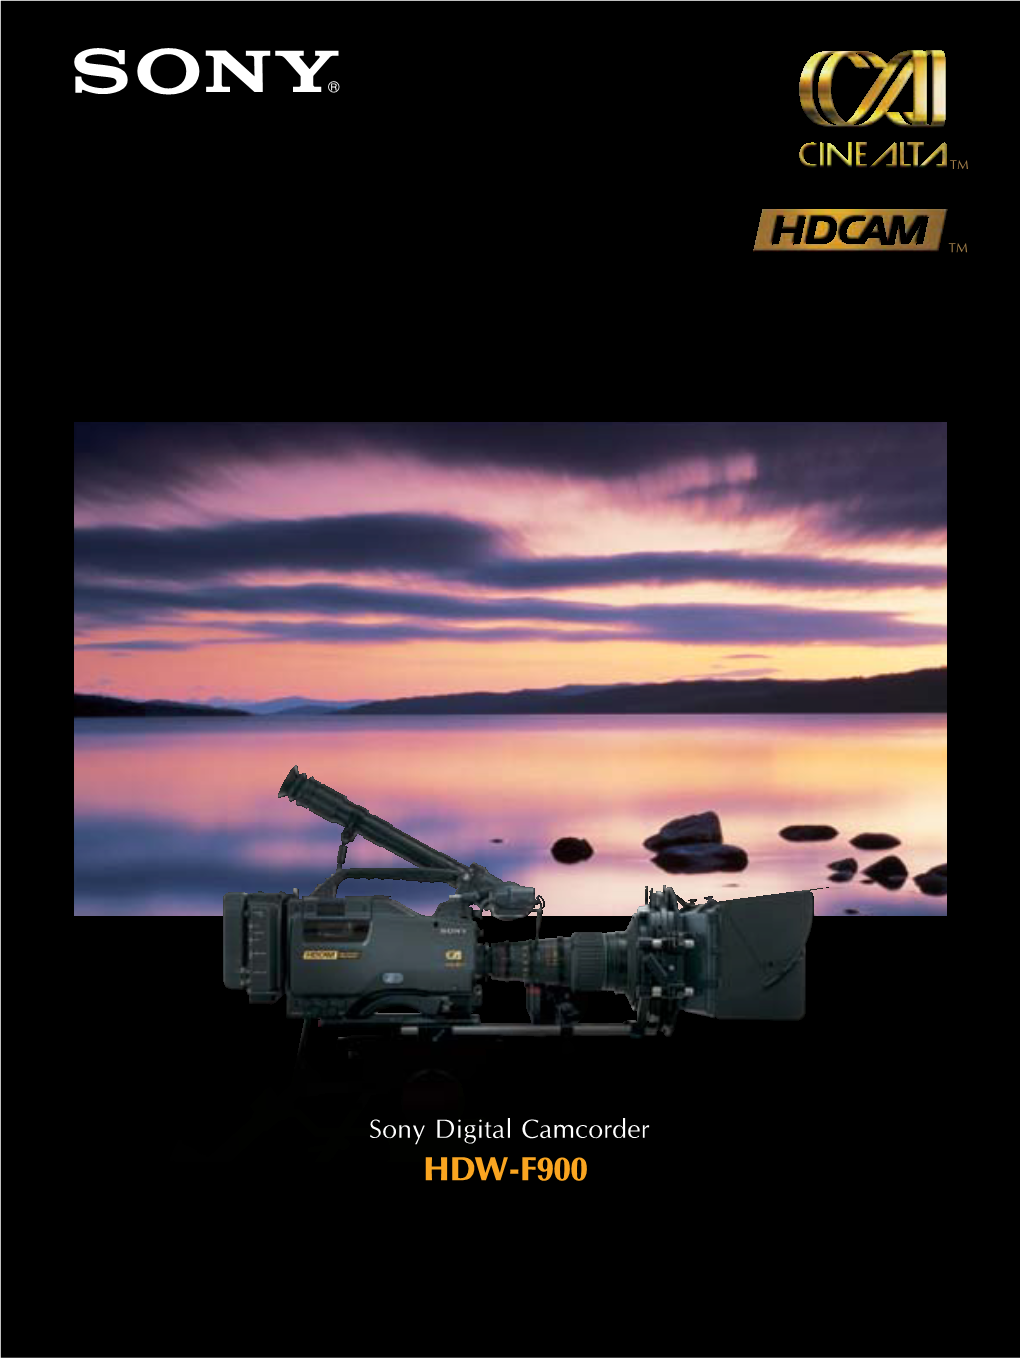 Sony Digital Camcorder HDW-F900 2 3 Exploring New Horizons in Movie Making